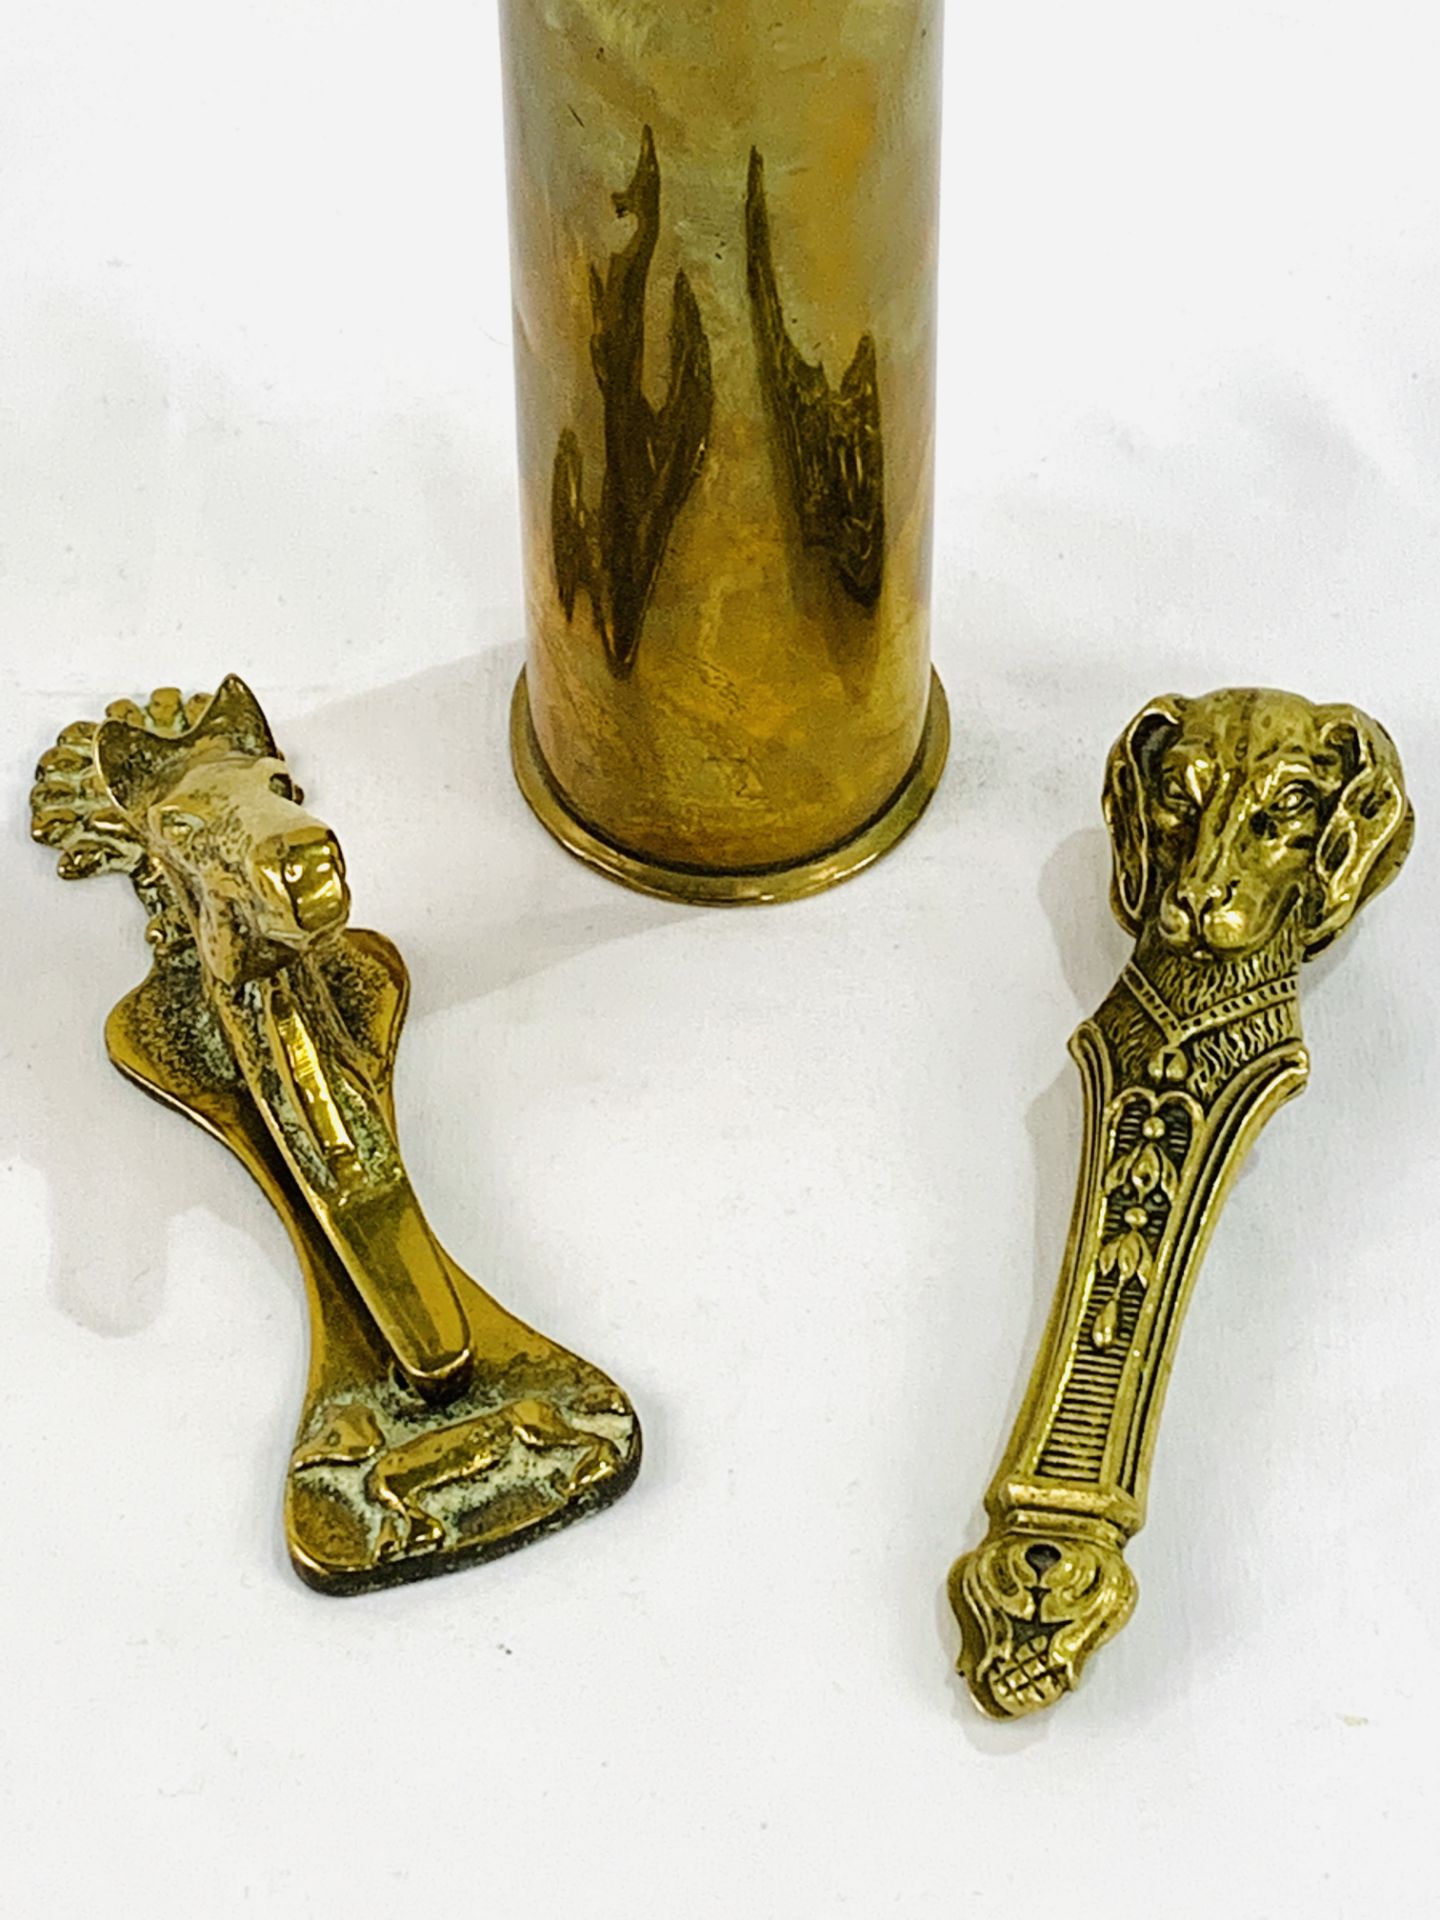 Brass dogs' head nut crackers, horse's head door knocker, shell and shell case - Image 2 of 5